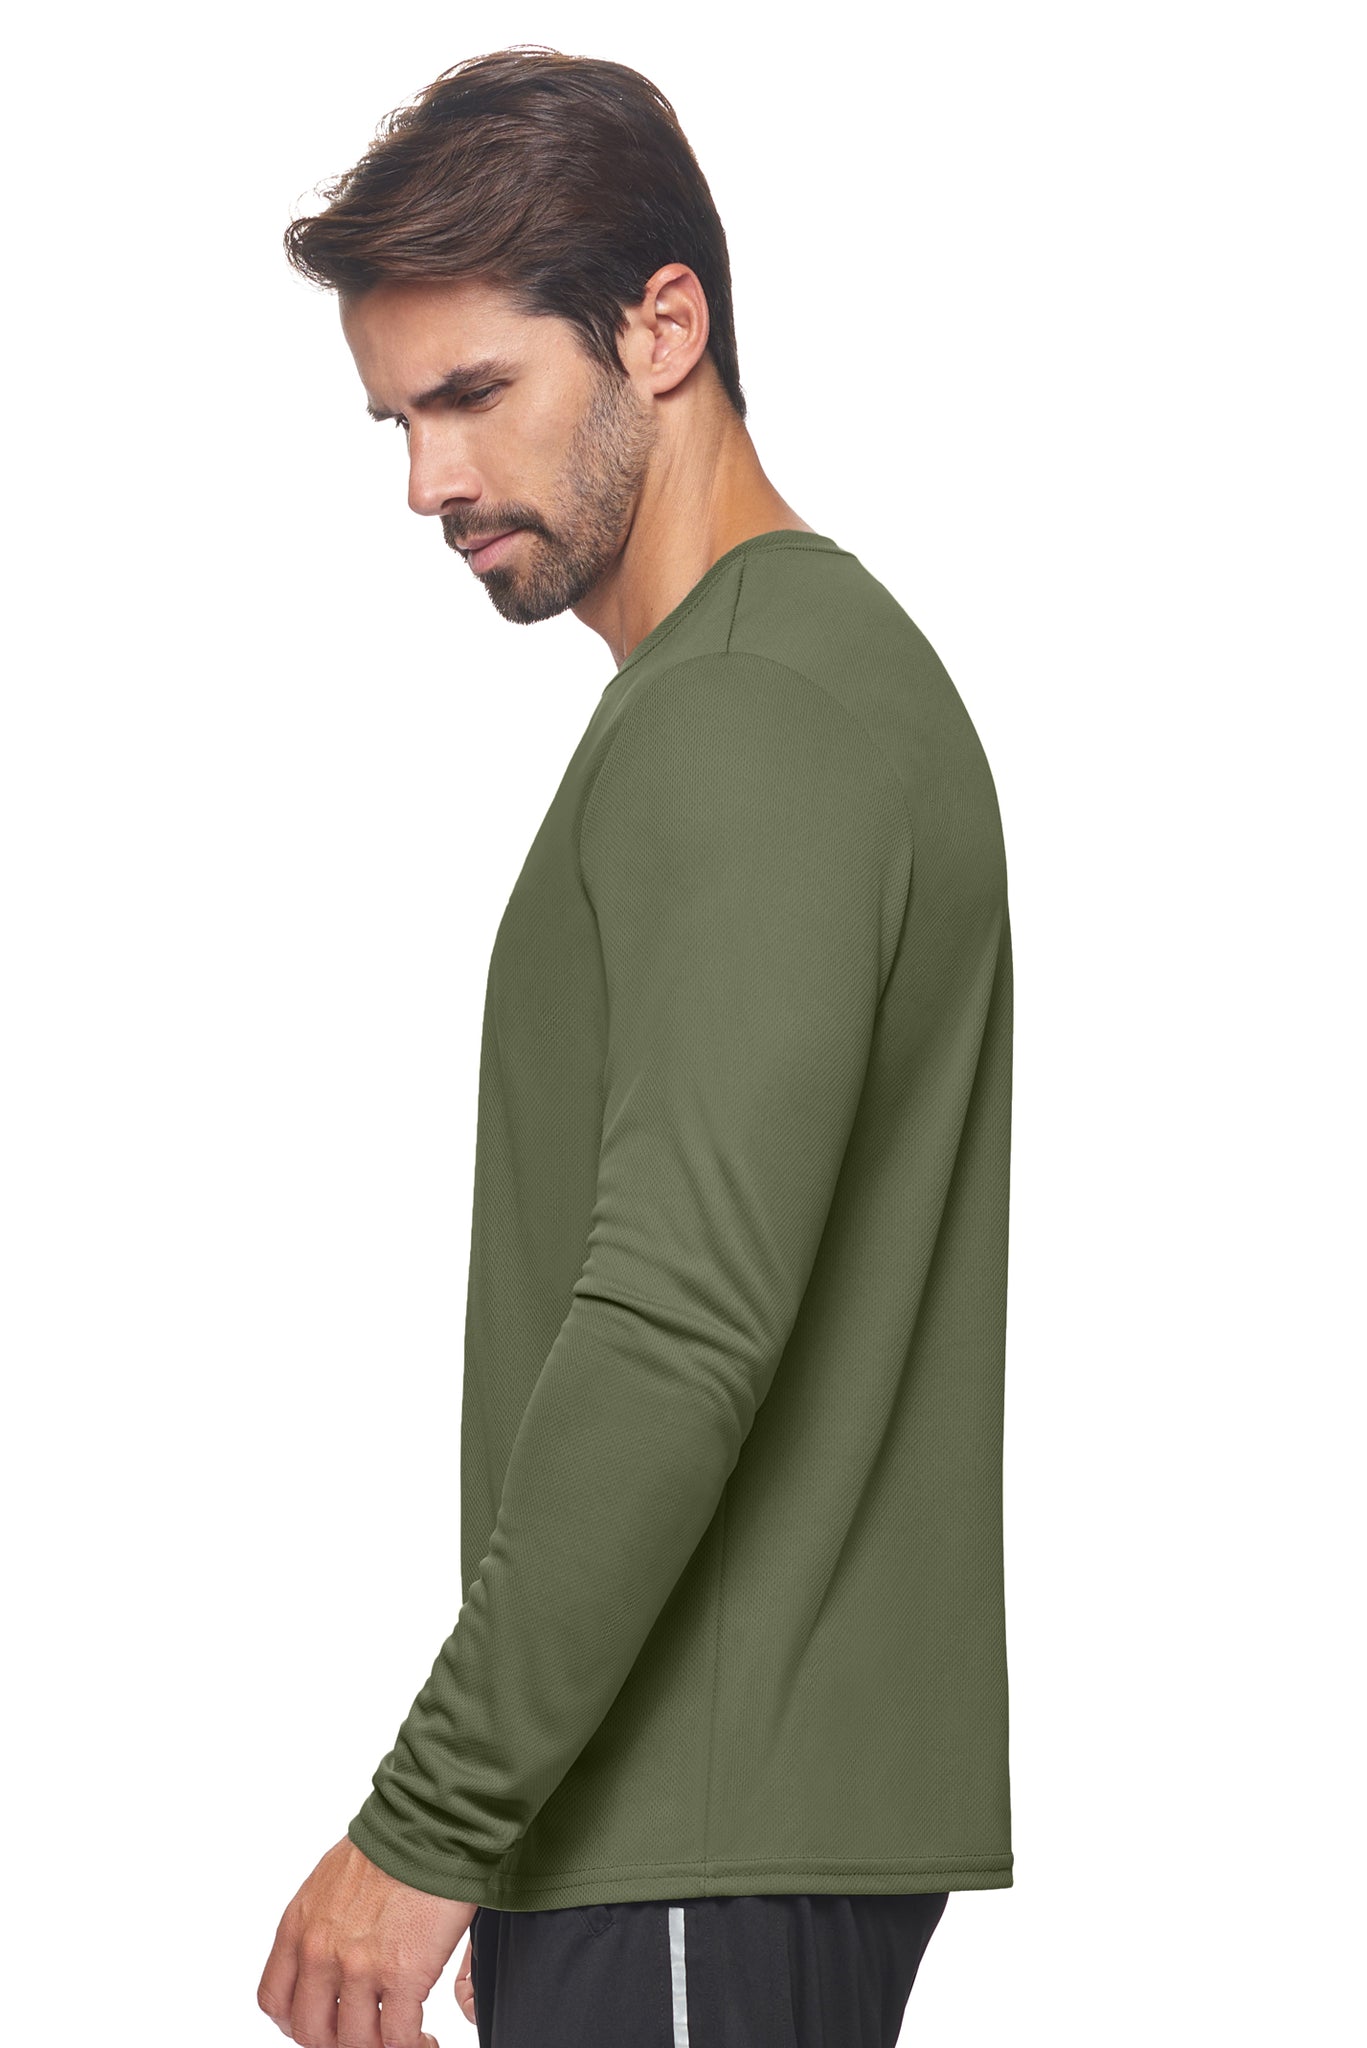 Expert Brand Wholesale Men's Oxymesh Performance Long Sleeve Tec Tee Made in USA AJ901D Military Green Image 2#military-green